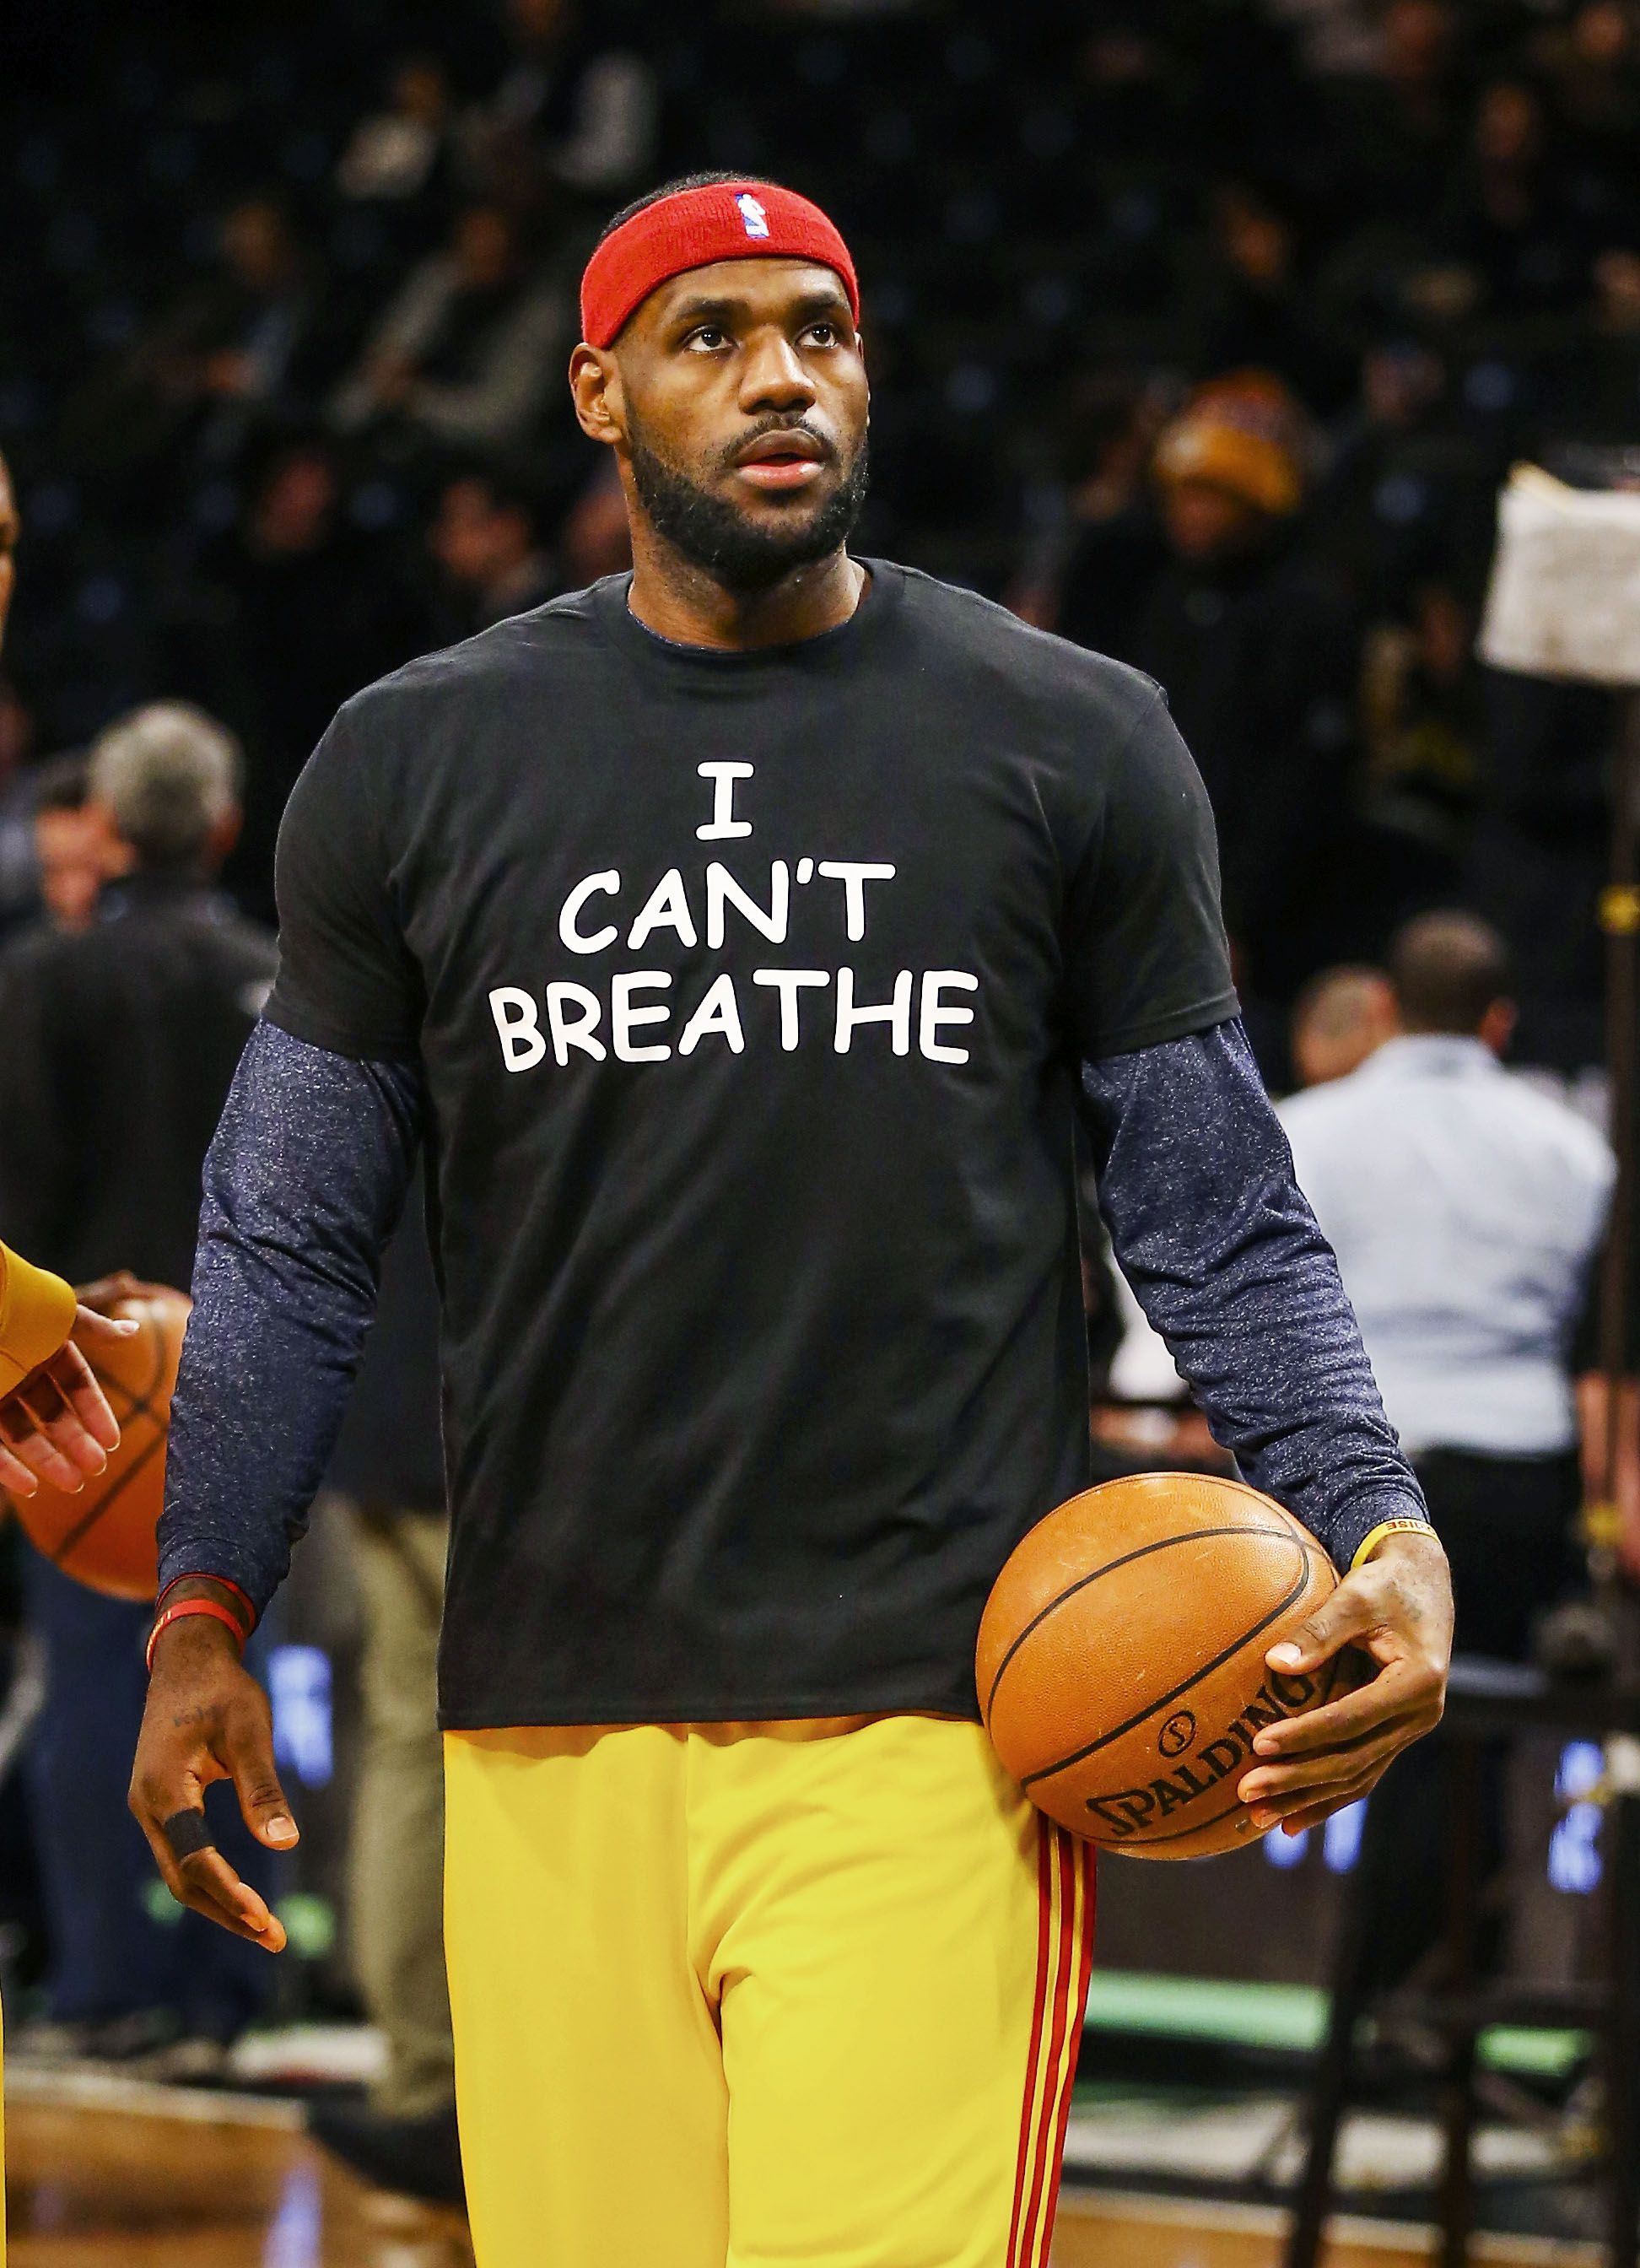 Kevin Durant Respects NBA Players Wearing 'I Can't Breathe' Shirts